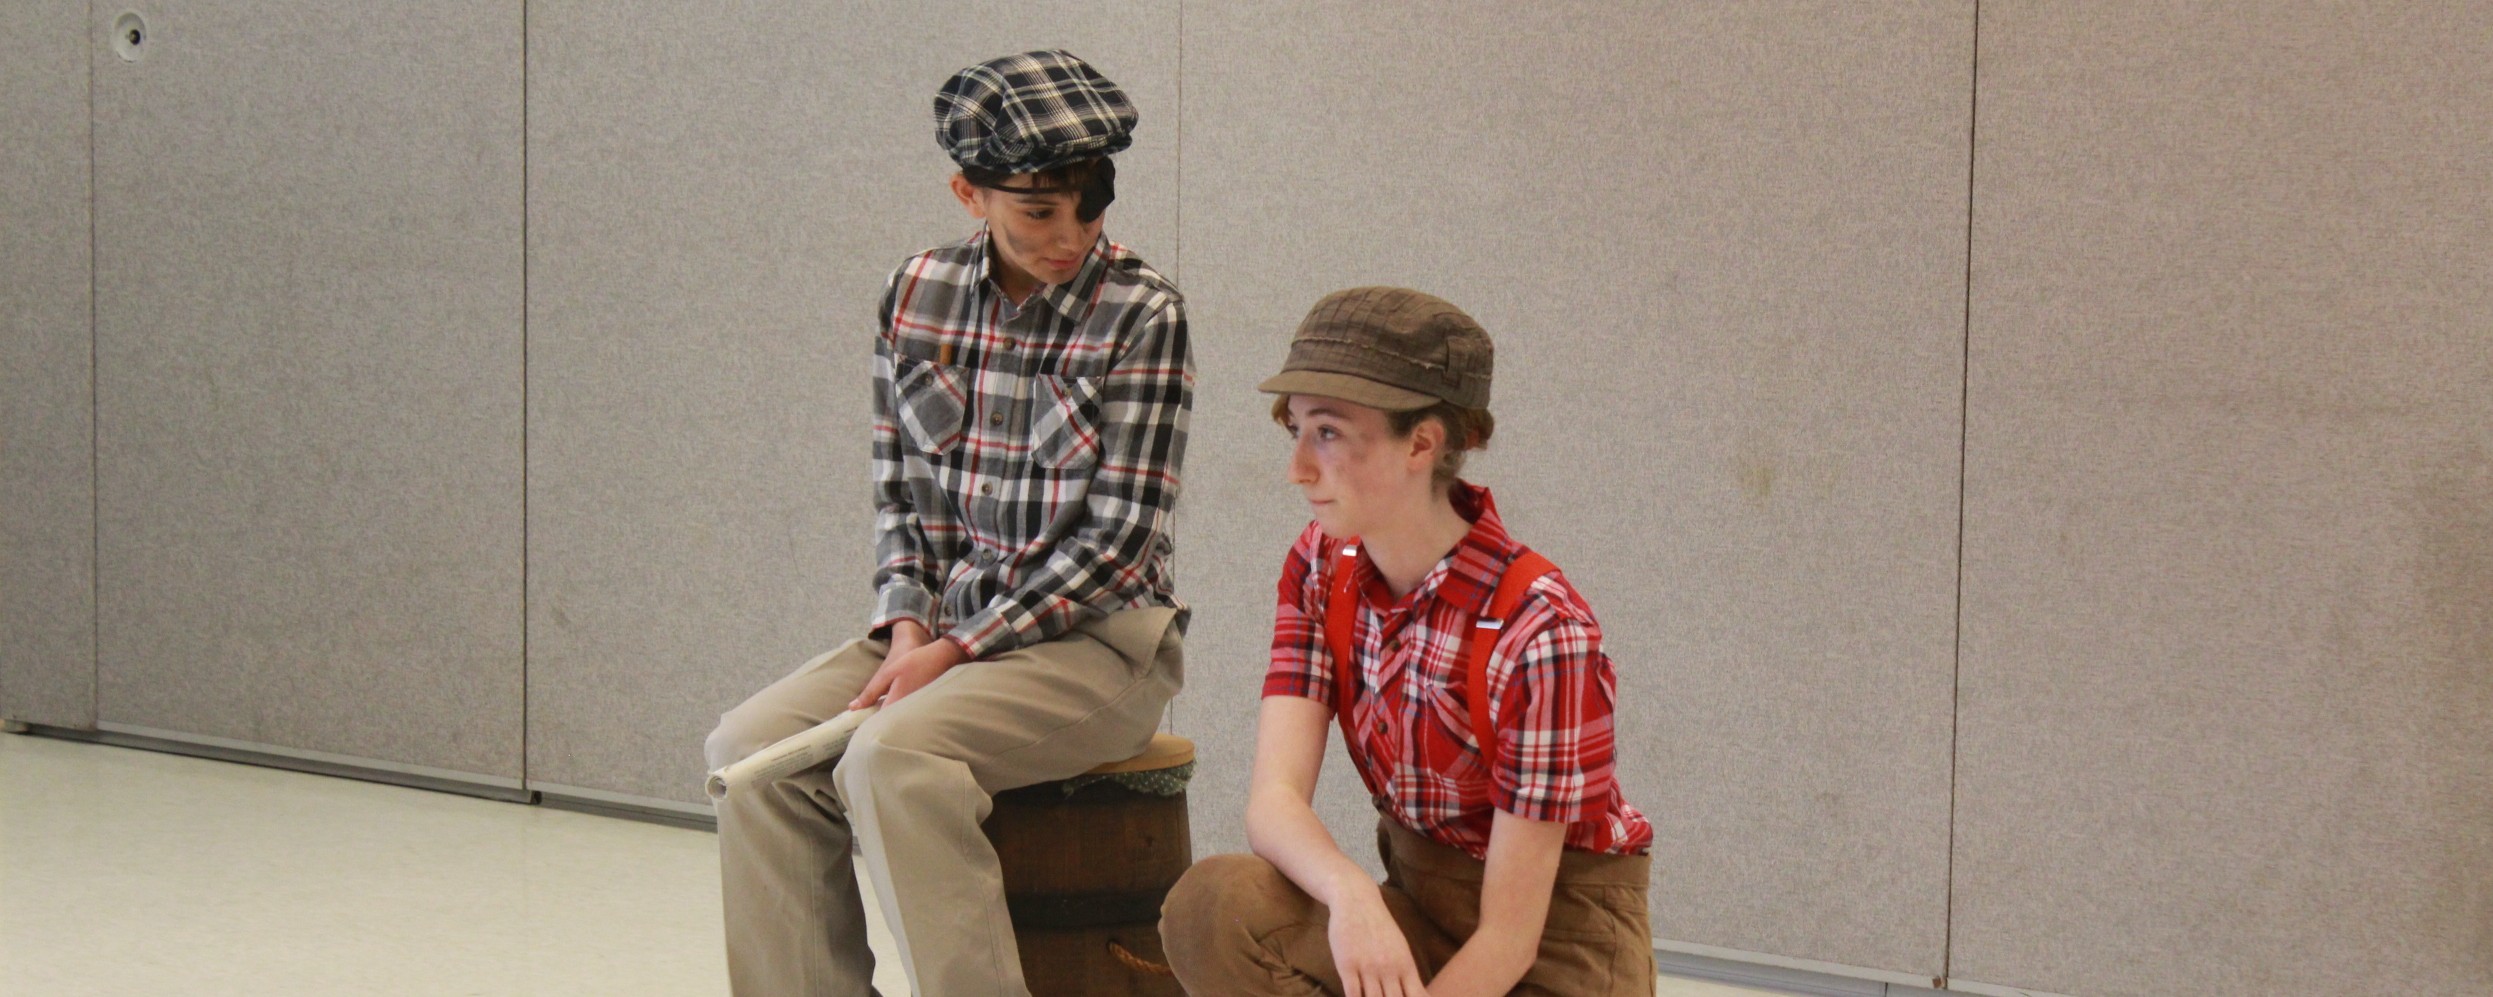 two students dressed as newspaper boys for performance